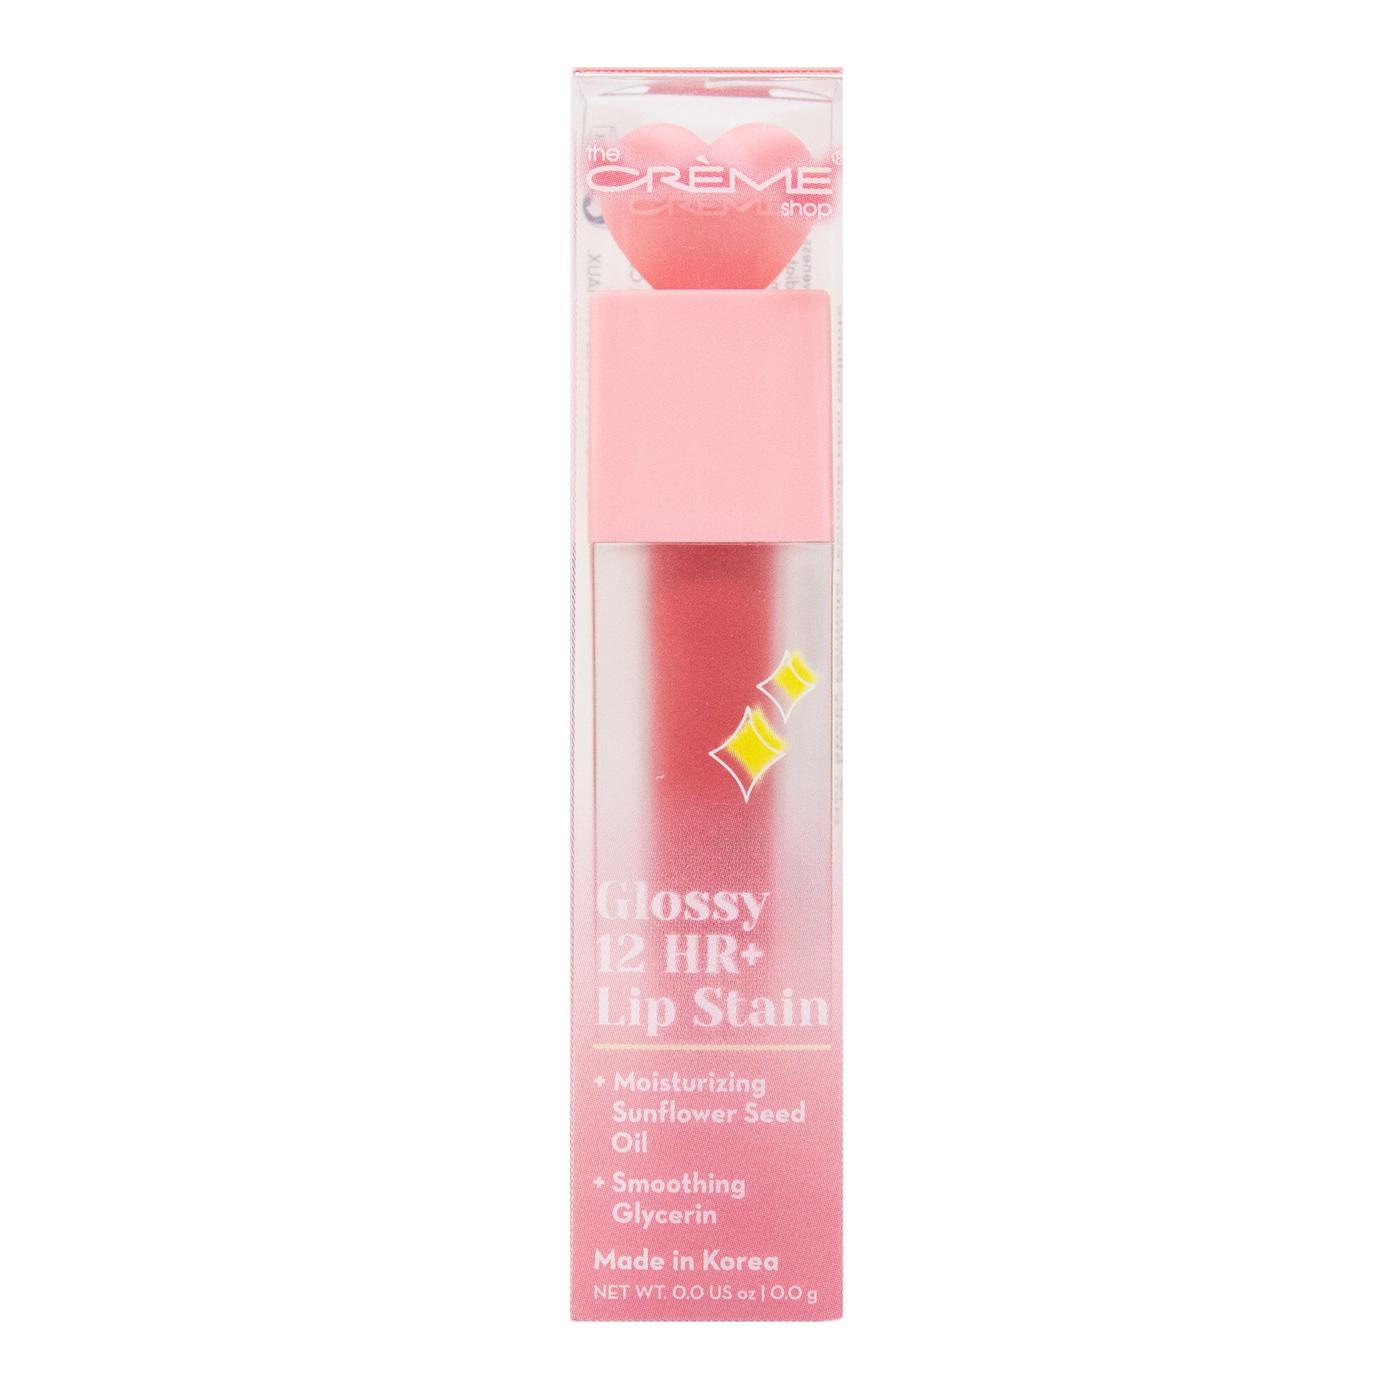 The Crème Shop Wine and Dine Glossy 12 Hour Plus Lip Stain; image 1 of 2